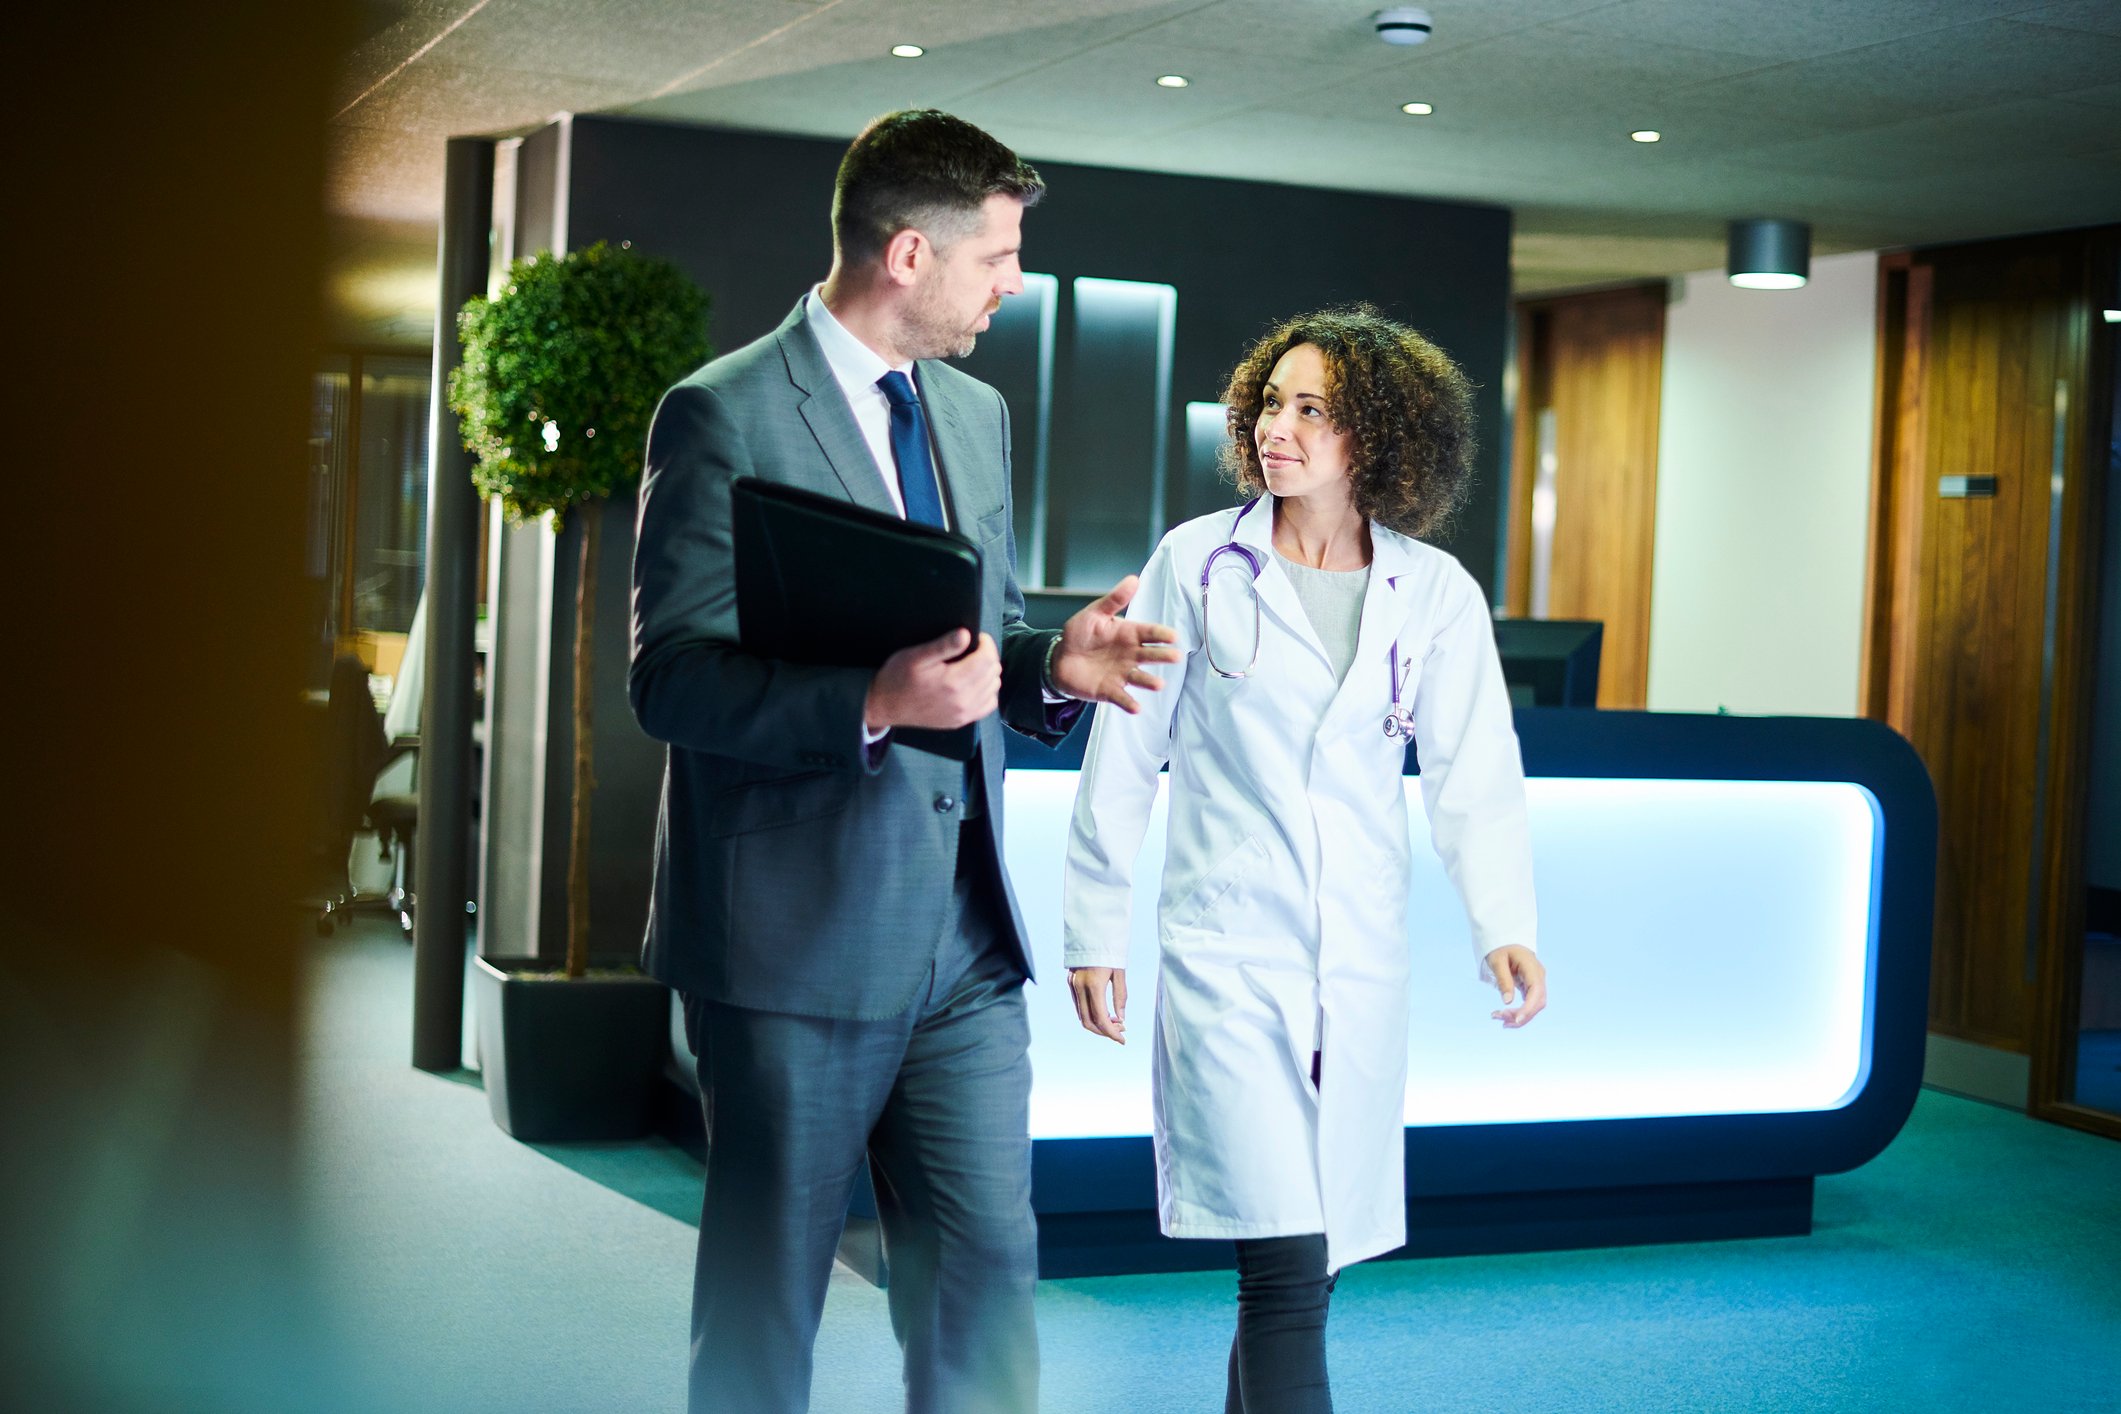 a businessman chats with a female doctor as they leave a boardroom meeting in a hospital